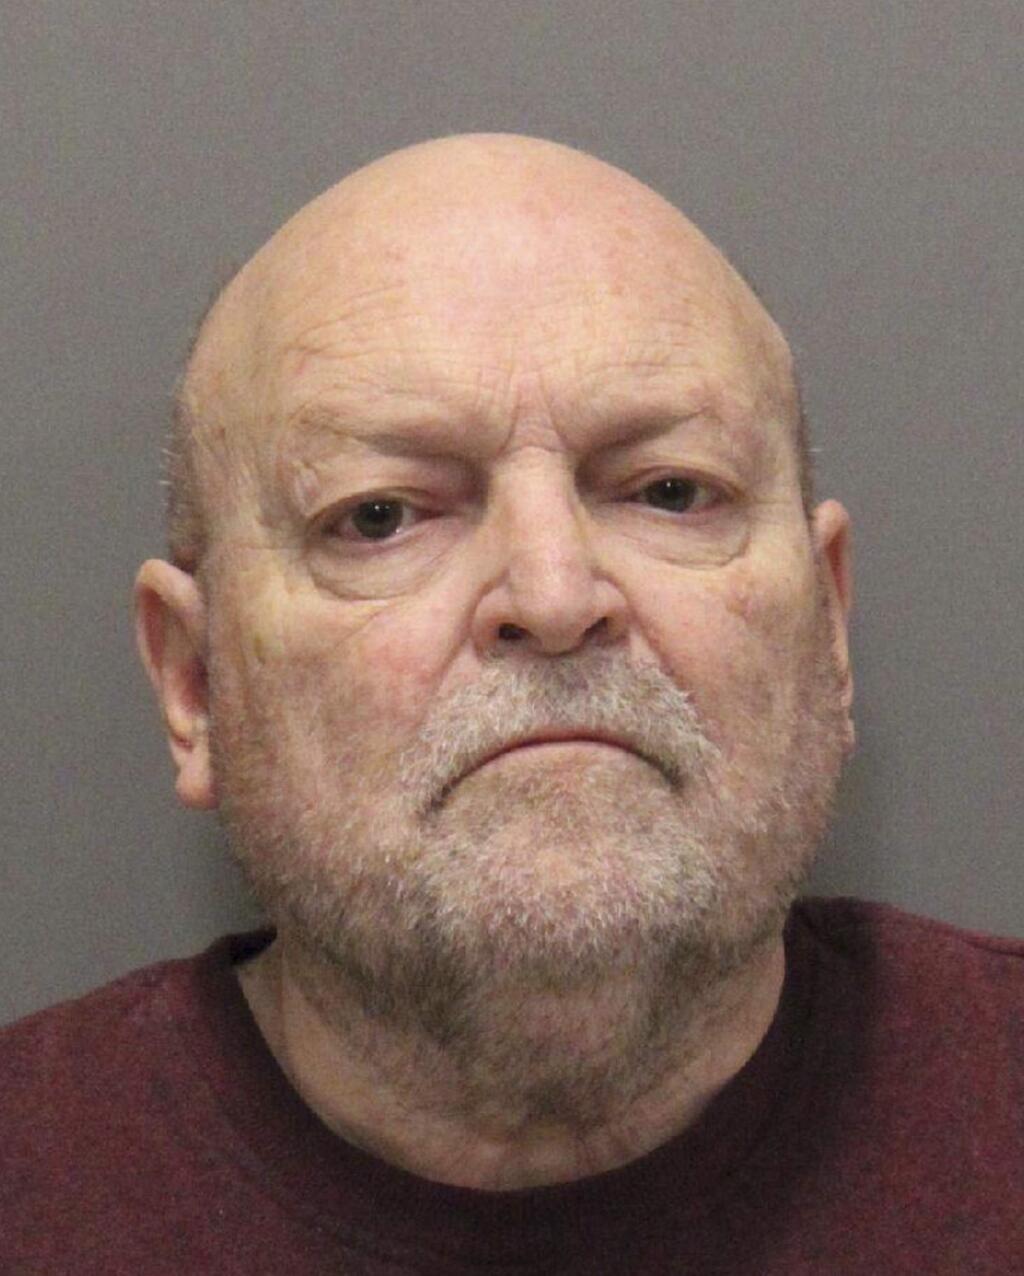 In this Nov. 20, 2018 photo released by the Santa Clara County Sheriff's Office is John Arthur Getreu. Northern California authorities say they have cracked a 45-year-old murder case using the same publicly available DNA database investigators accessed to arrest alleged serial killer Joseph DeAngelo. The Santa Clara County sheriff's department said Wednesday that officers arrested 74-year-old John Arthur Getreu on suspicion of killing 21-year-old Leslie Perlov in 1973. (Santa Clara County Sheriff's Office via AP)